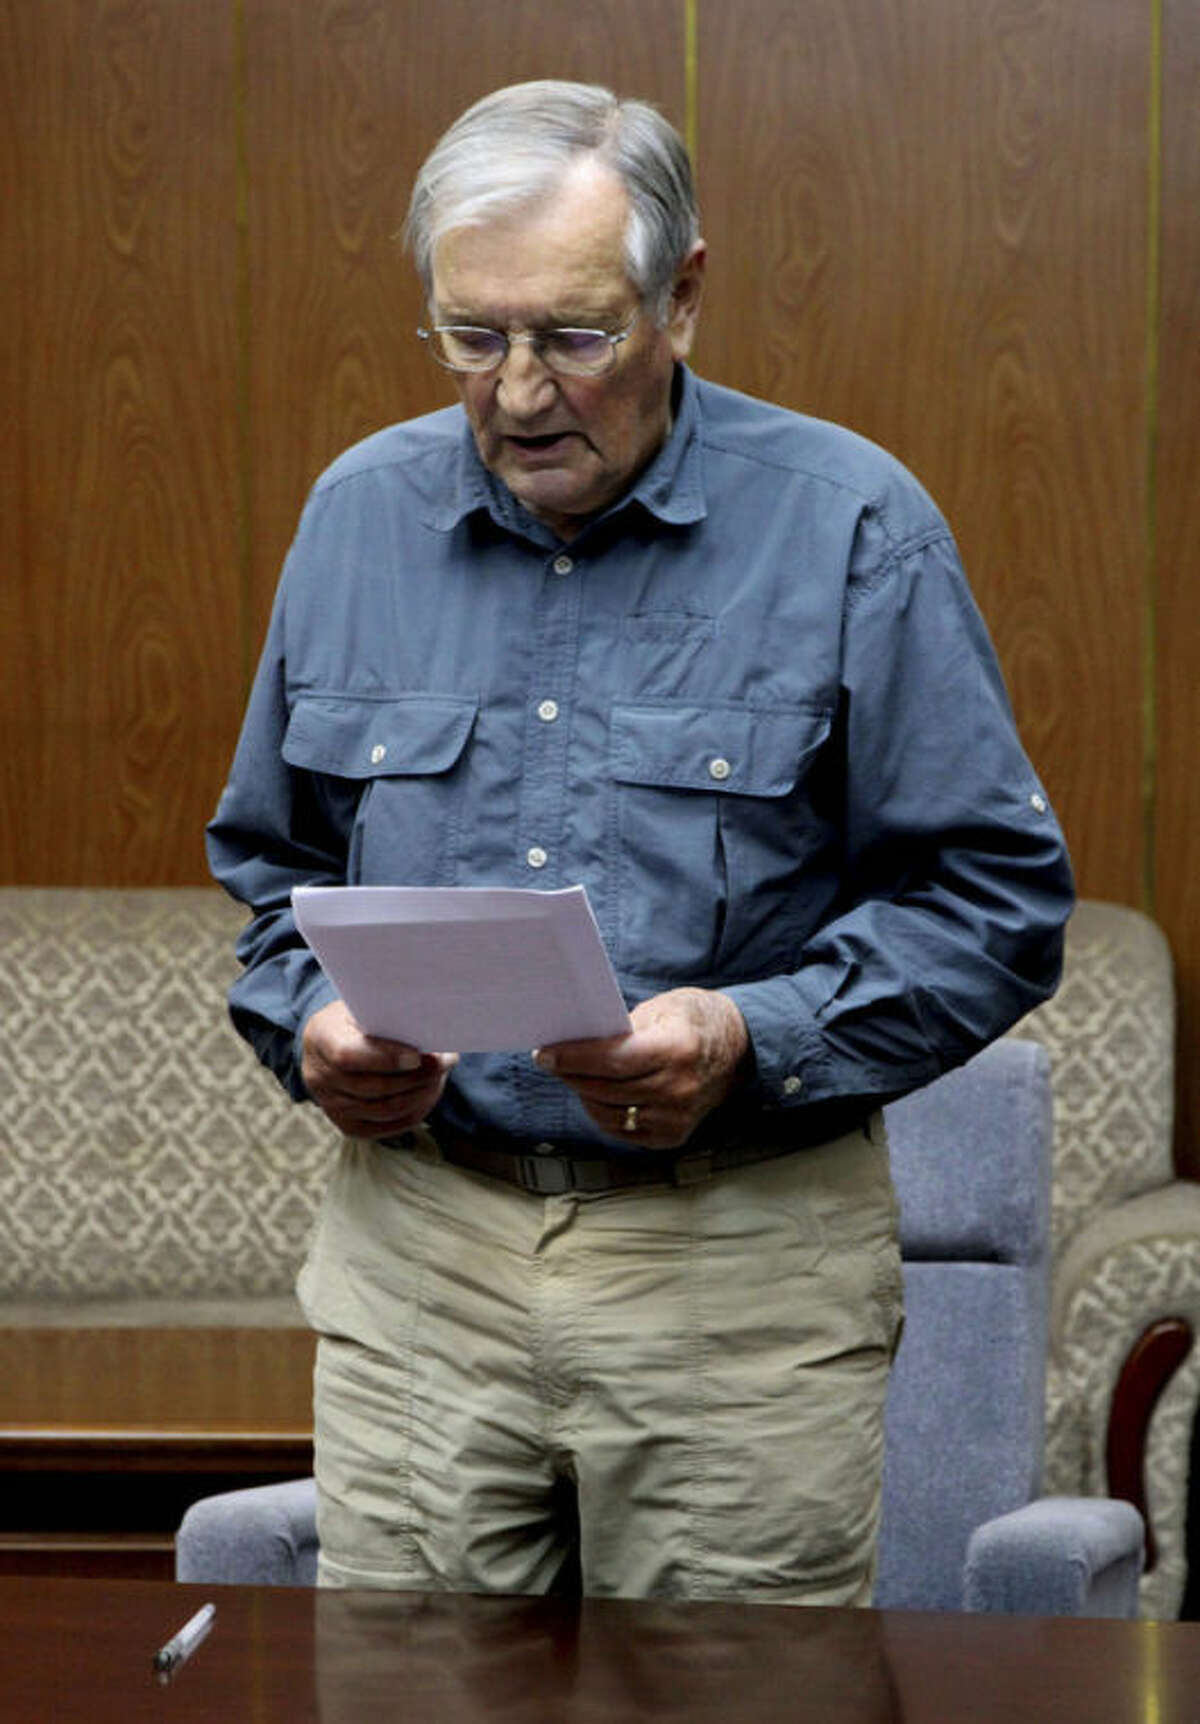 FILE - In this Nov. 9, 2013 file photo released by the Korean Central News Agency (KCNA) and distributed Nov. 30, 2013 by the Korea News Service, U.S. citizen Merrill Newman, 85, reads a document, which North Korean authorities say was an apology that Newman wrote and read in North Korea. Six decades before he went to North Korea as a curious tourist, Newman supervised a group of South Korean guerrillas during the Korean War who were perhaps the most hated and feared fighters in the North, former members of the group say. (AP Photo/KCNA via KNS)